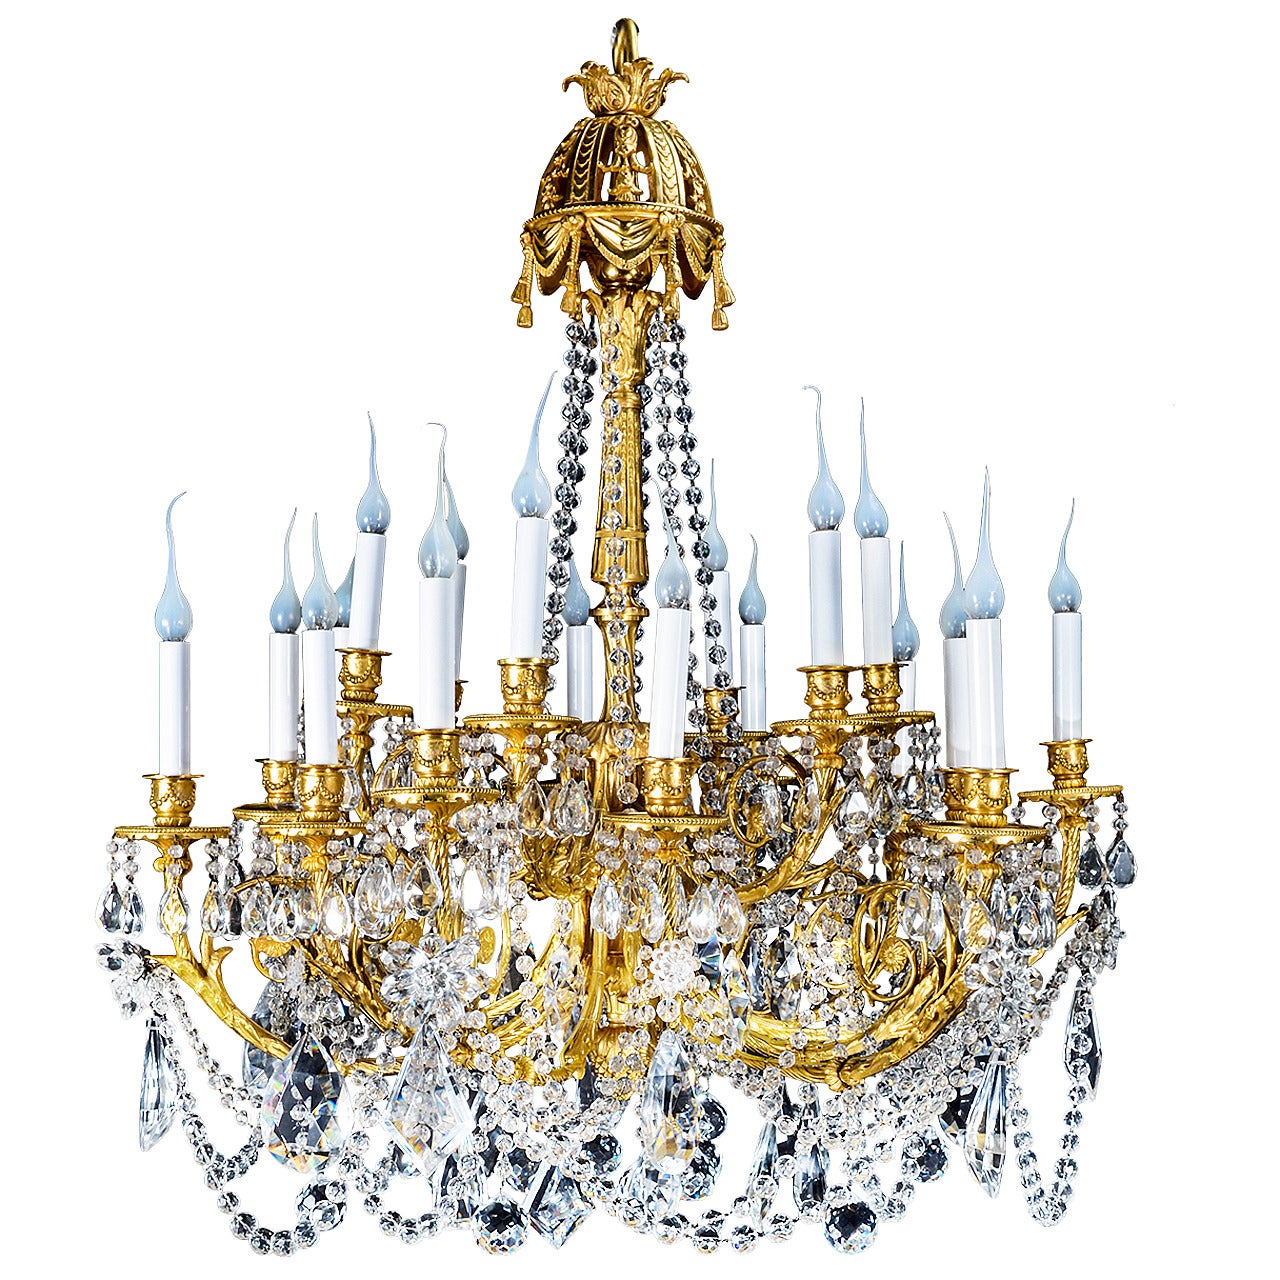 Superb Antique French Louis XVI Style Gilt Bronze and Crystal Chandelier